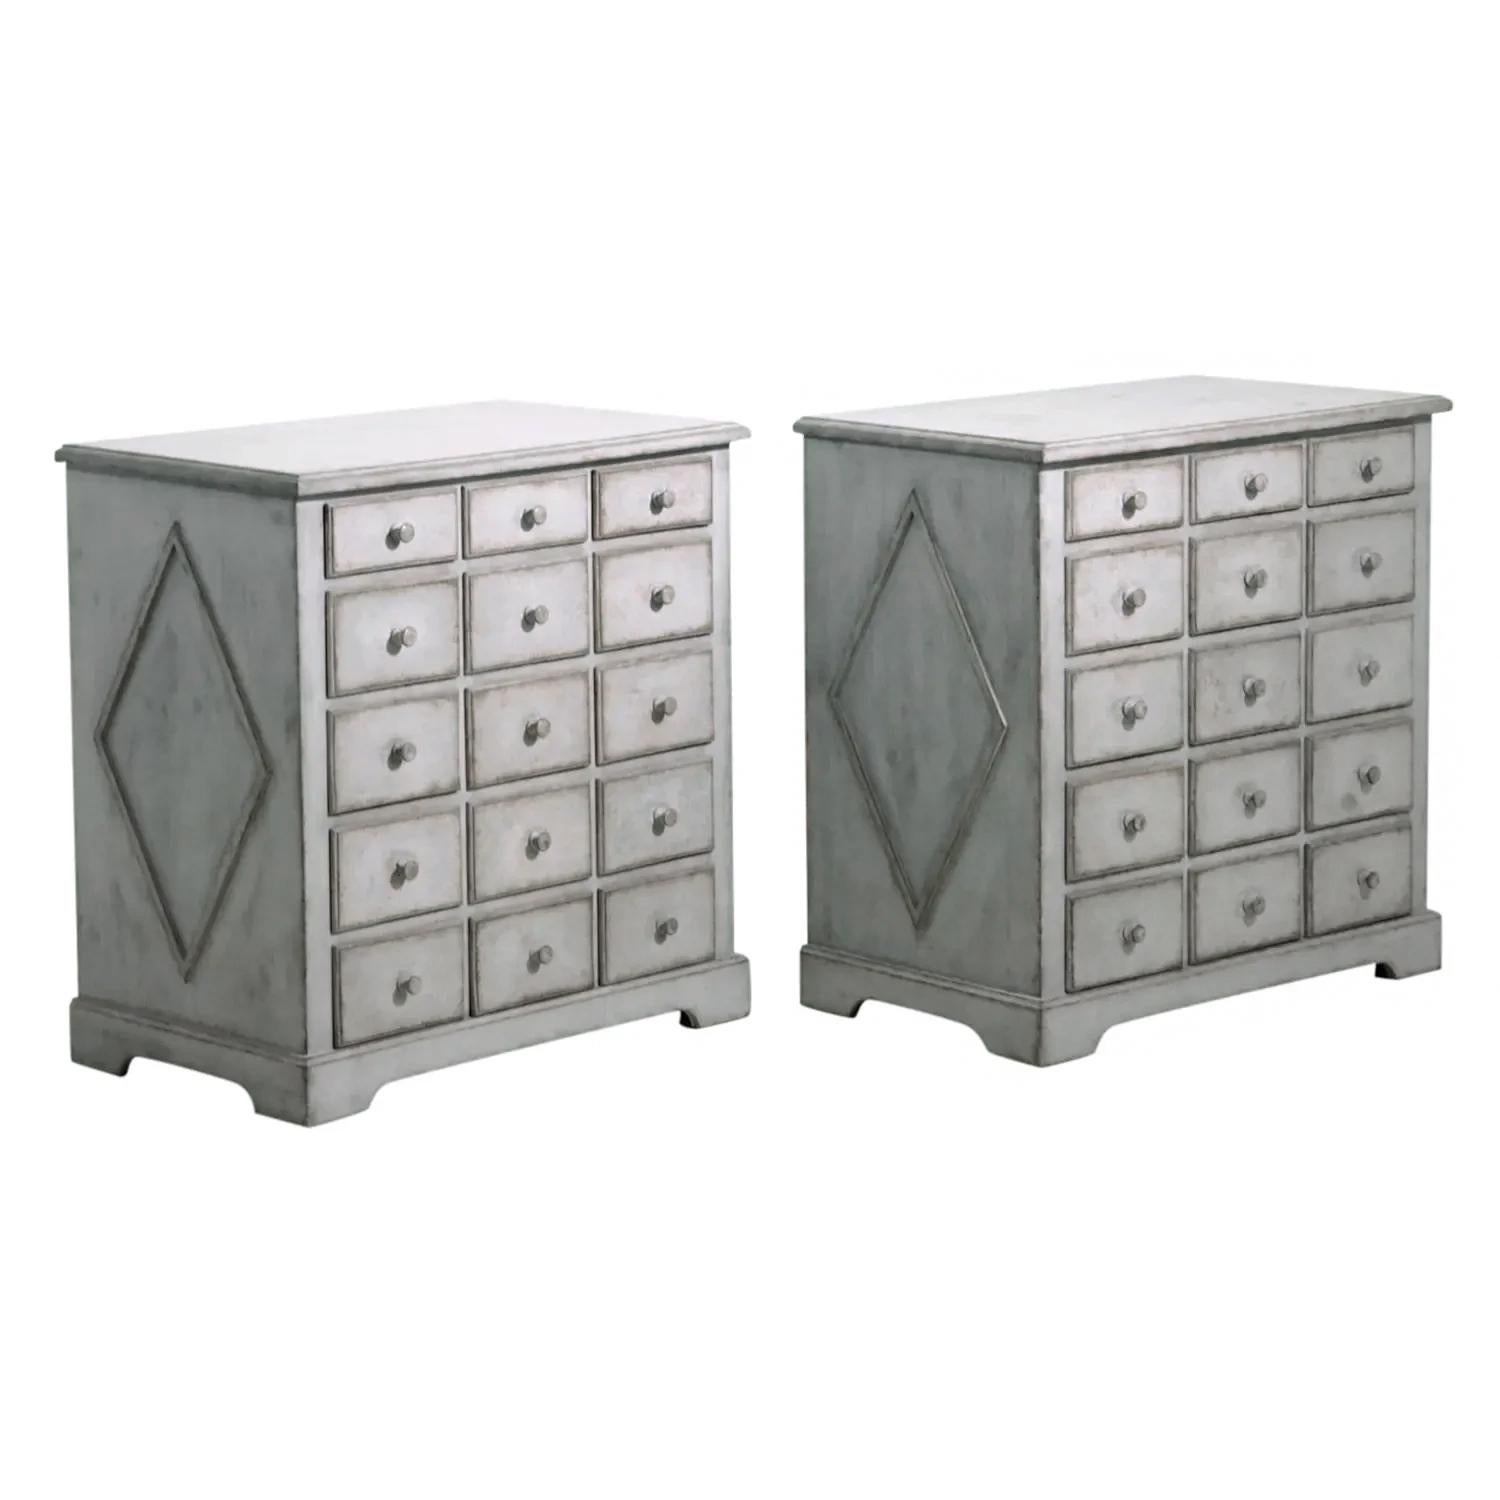 A dark-grey, white antique Swedish Gustavian pair of pharmacy desks made of hand crafted painted Oakwood, in good condition. Each of the Scandinavian apothecary cabinets are composed with fifteen drawers with round wooden pulls, supported by four